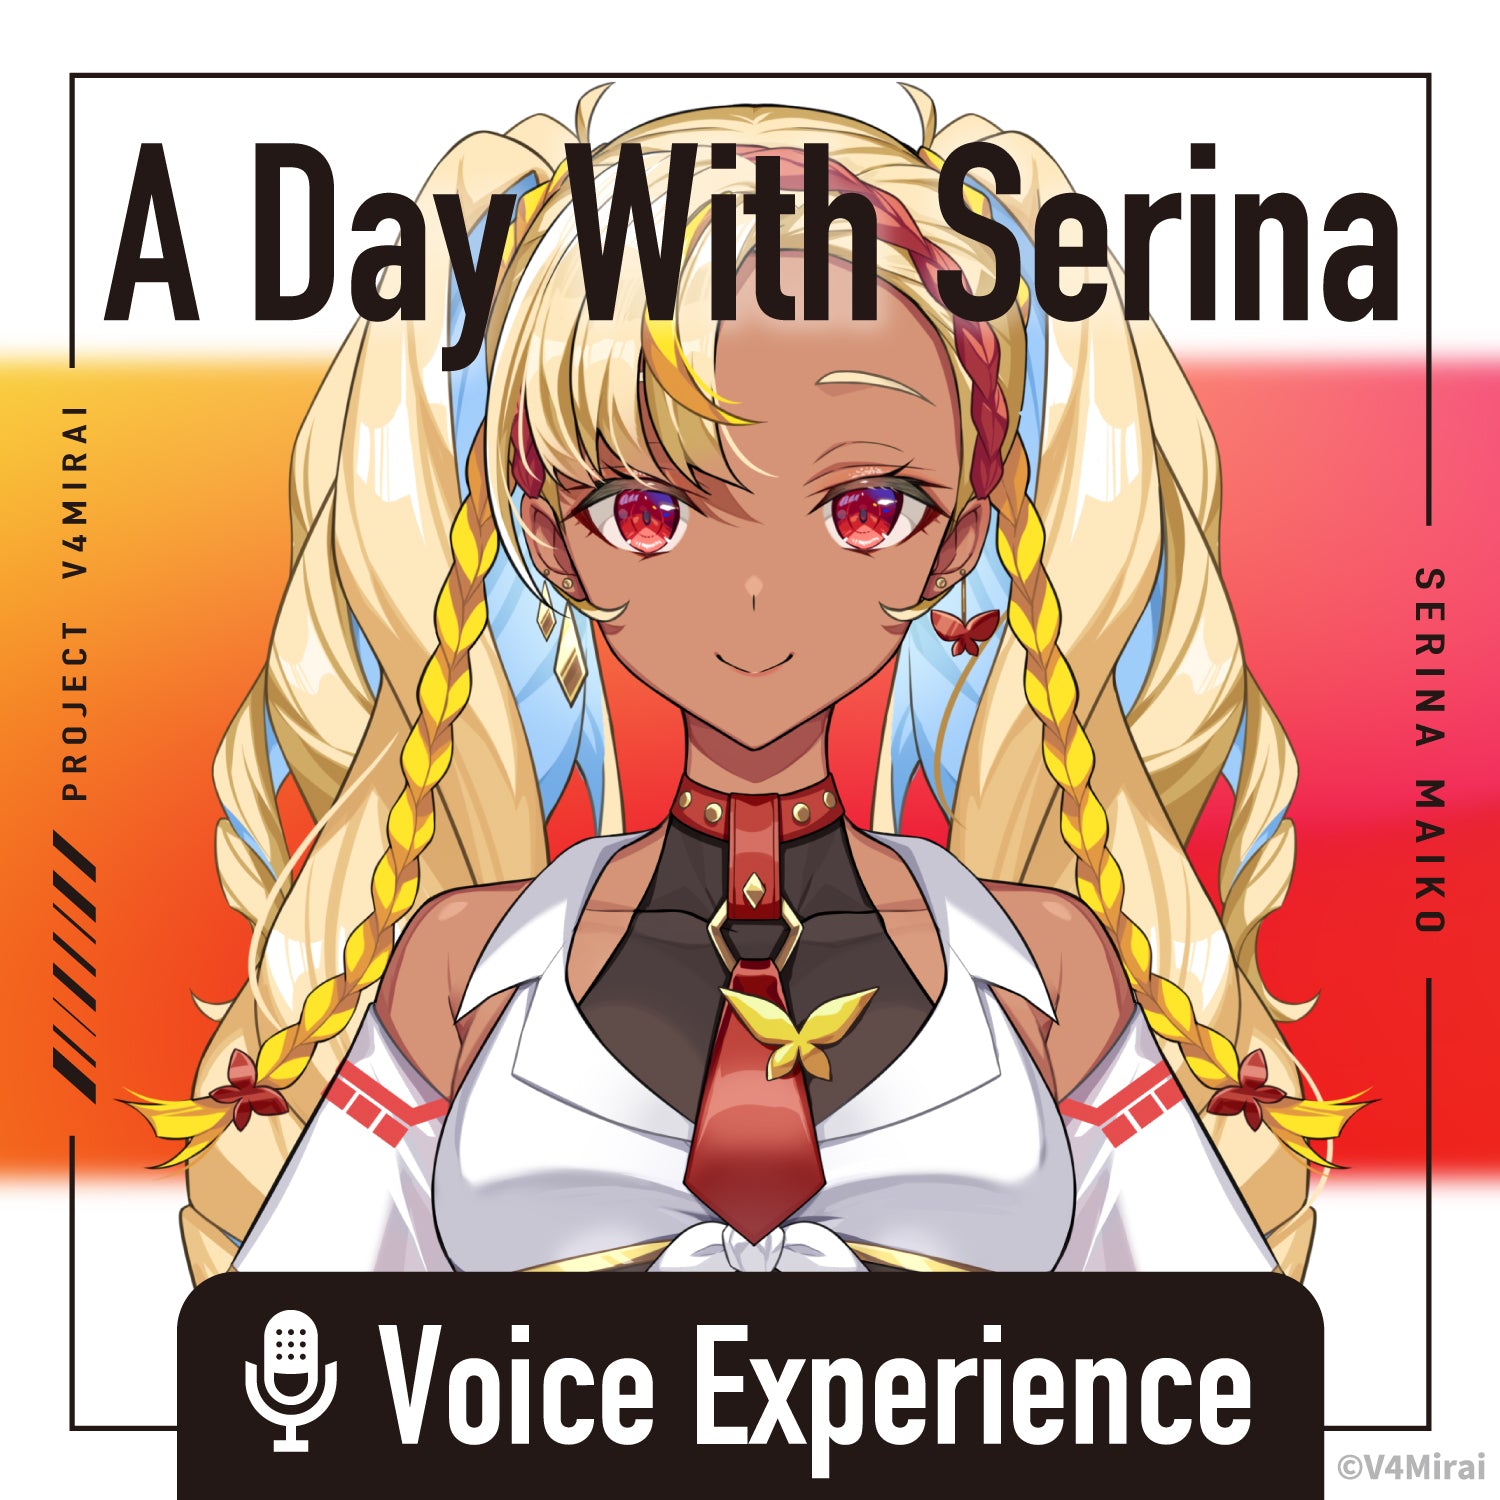 A Day With Serina - Voice Experience